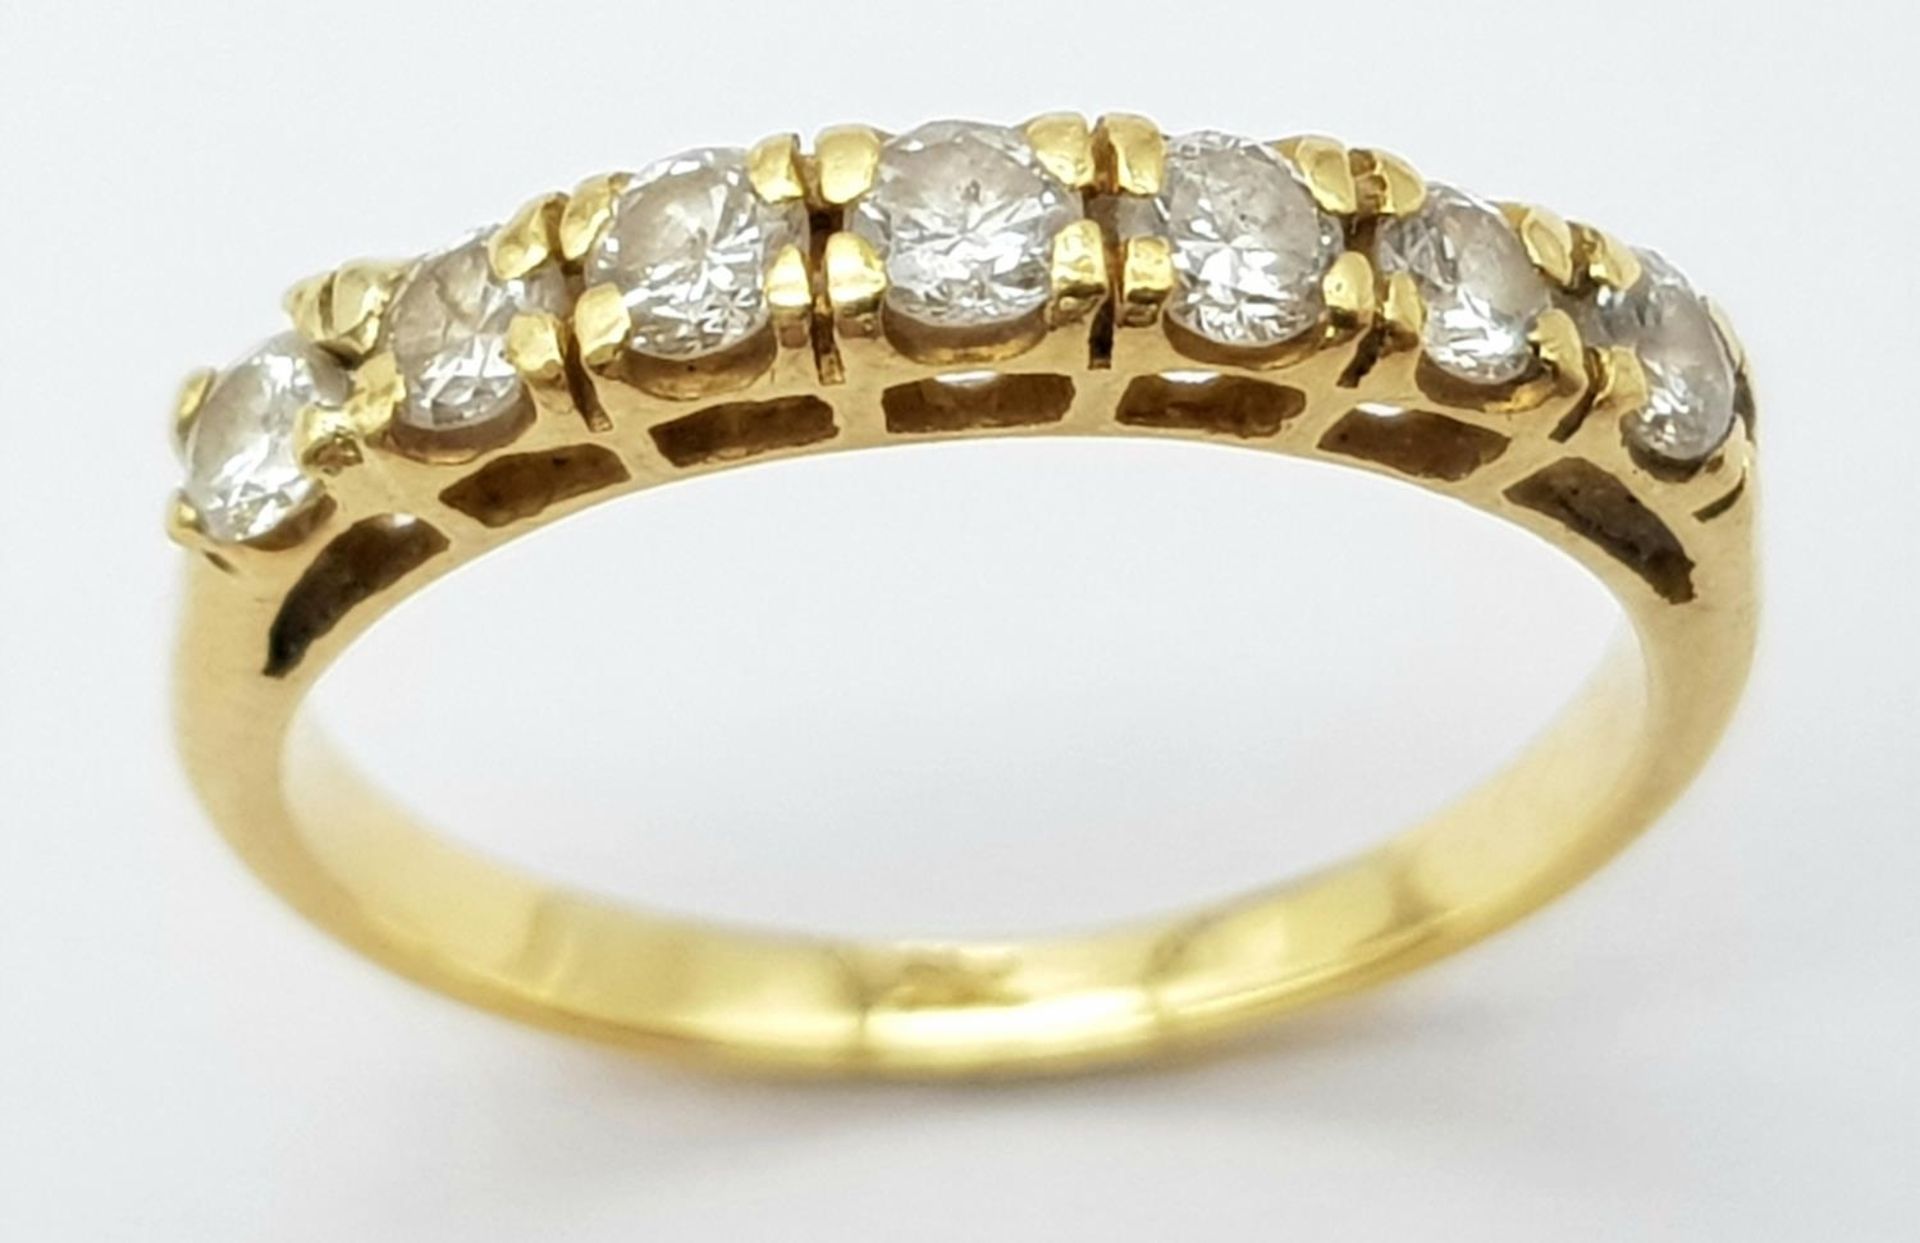 AN 18K (TESTED) YELLOW GOLD DIAMOND BAND RING. 0.35ctw, size I, 1.9g total weight. Ref: SC 9043 - Image 2 of 4